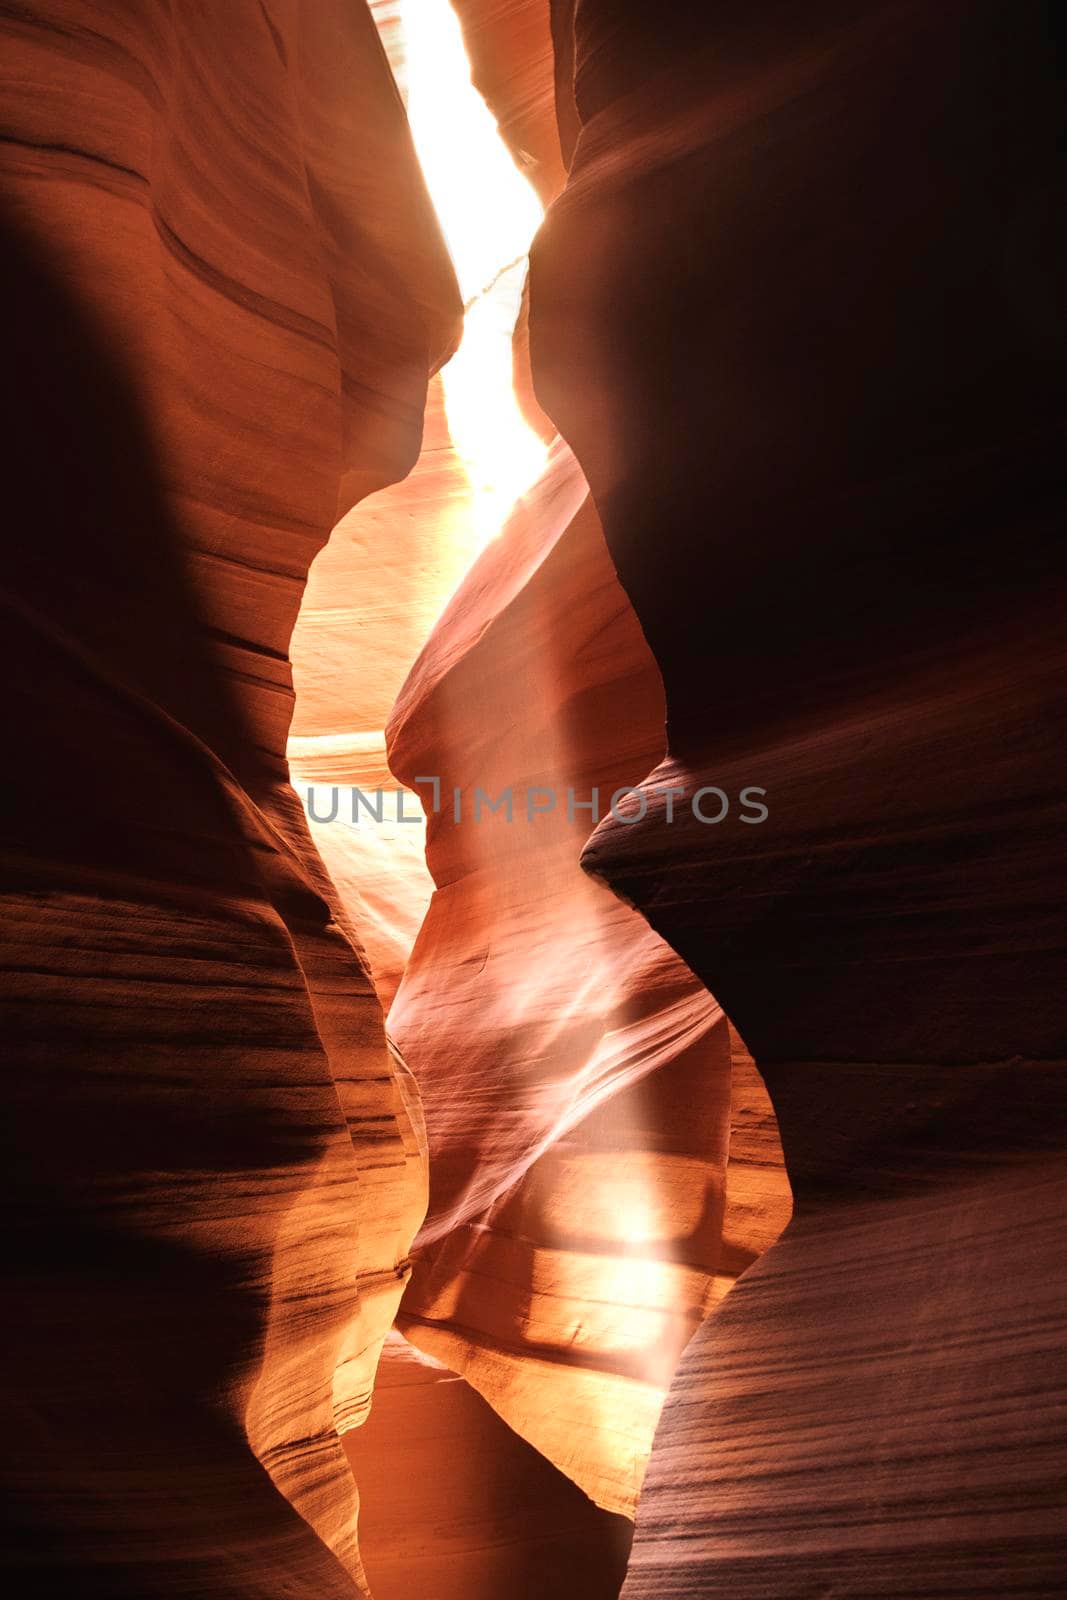 Rays of light in Antelope canyon by ValentimePix